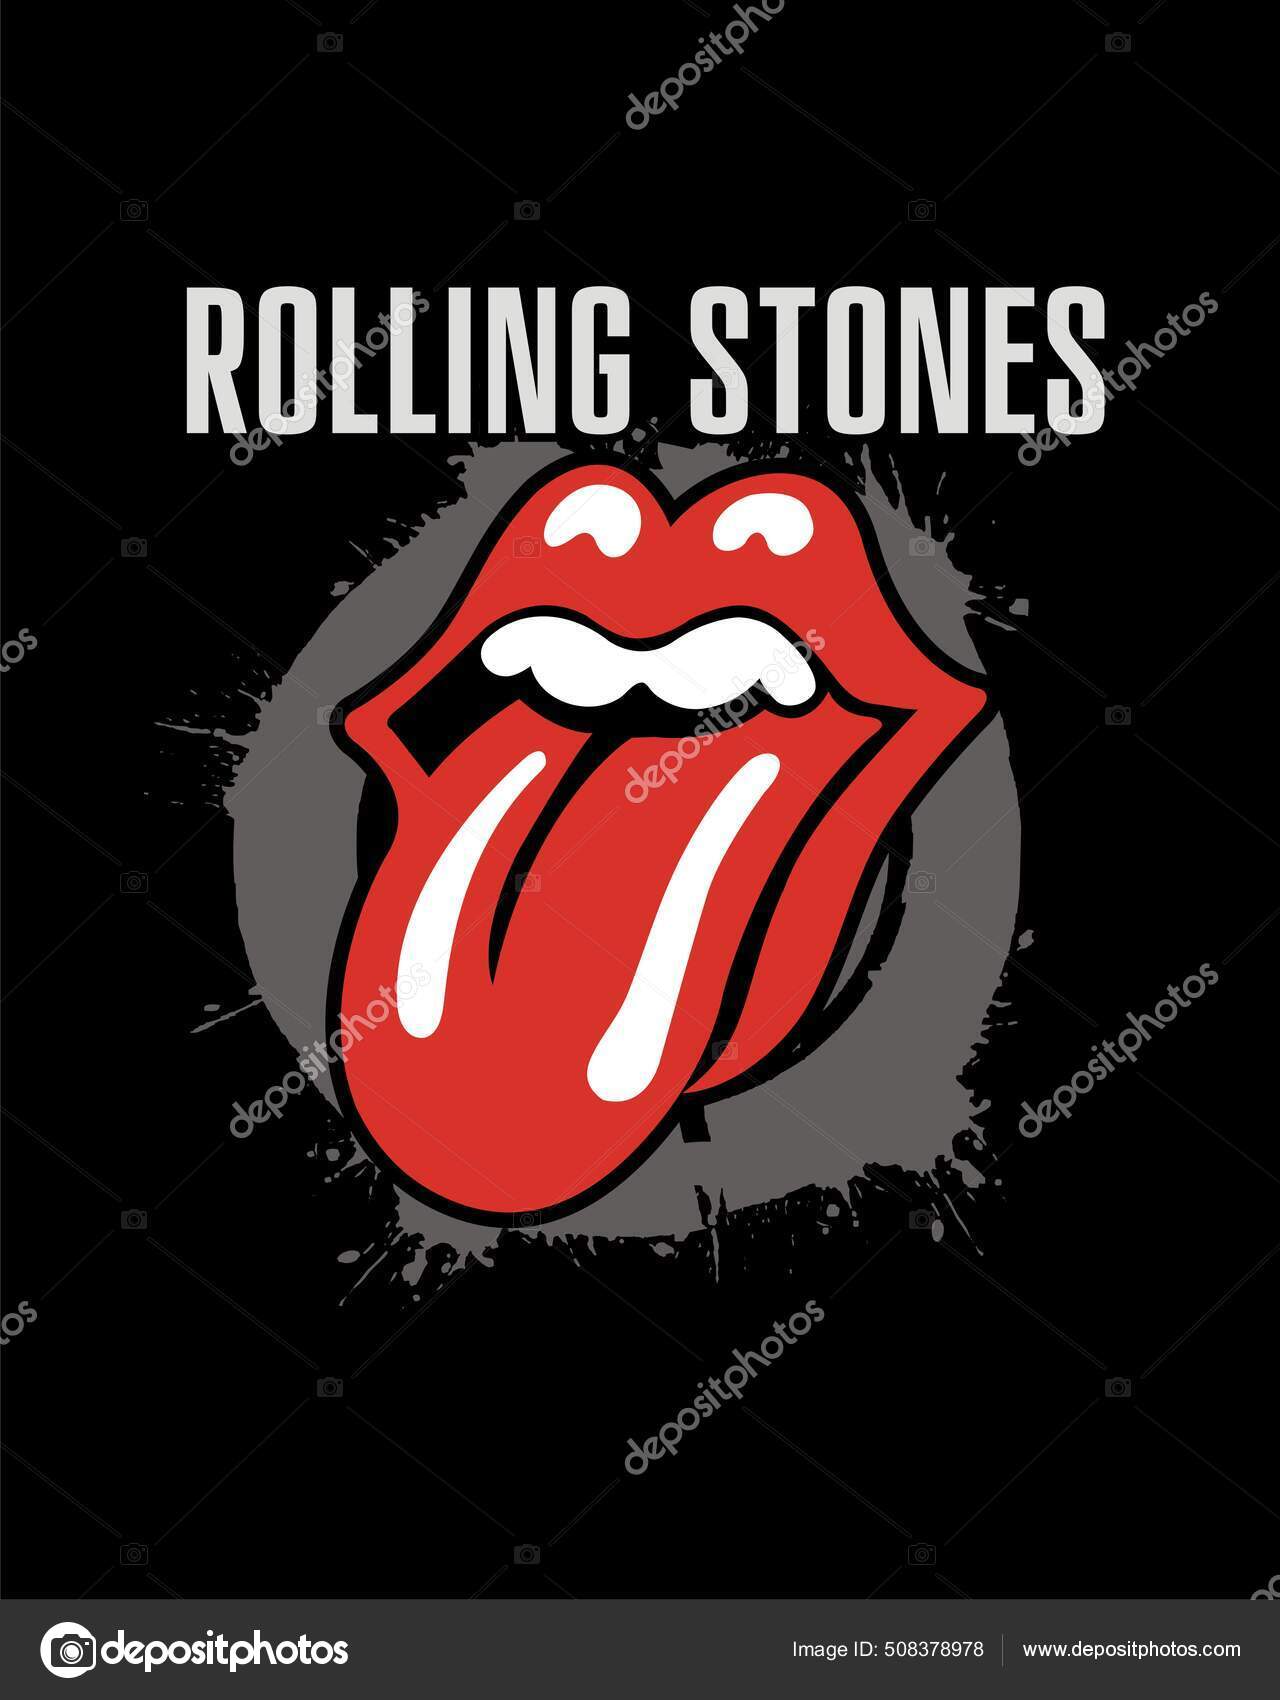 The rolling stones vector art stock images